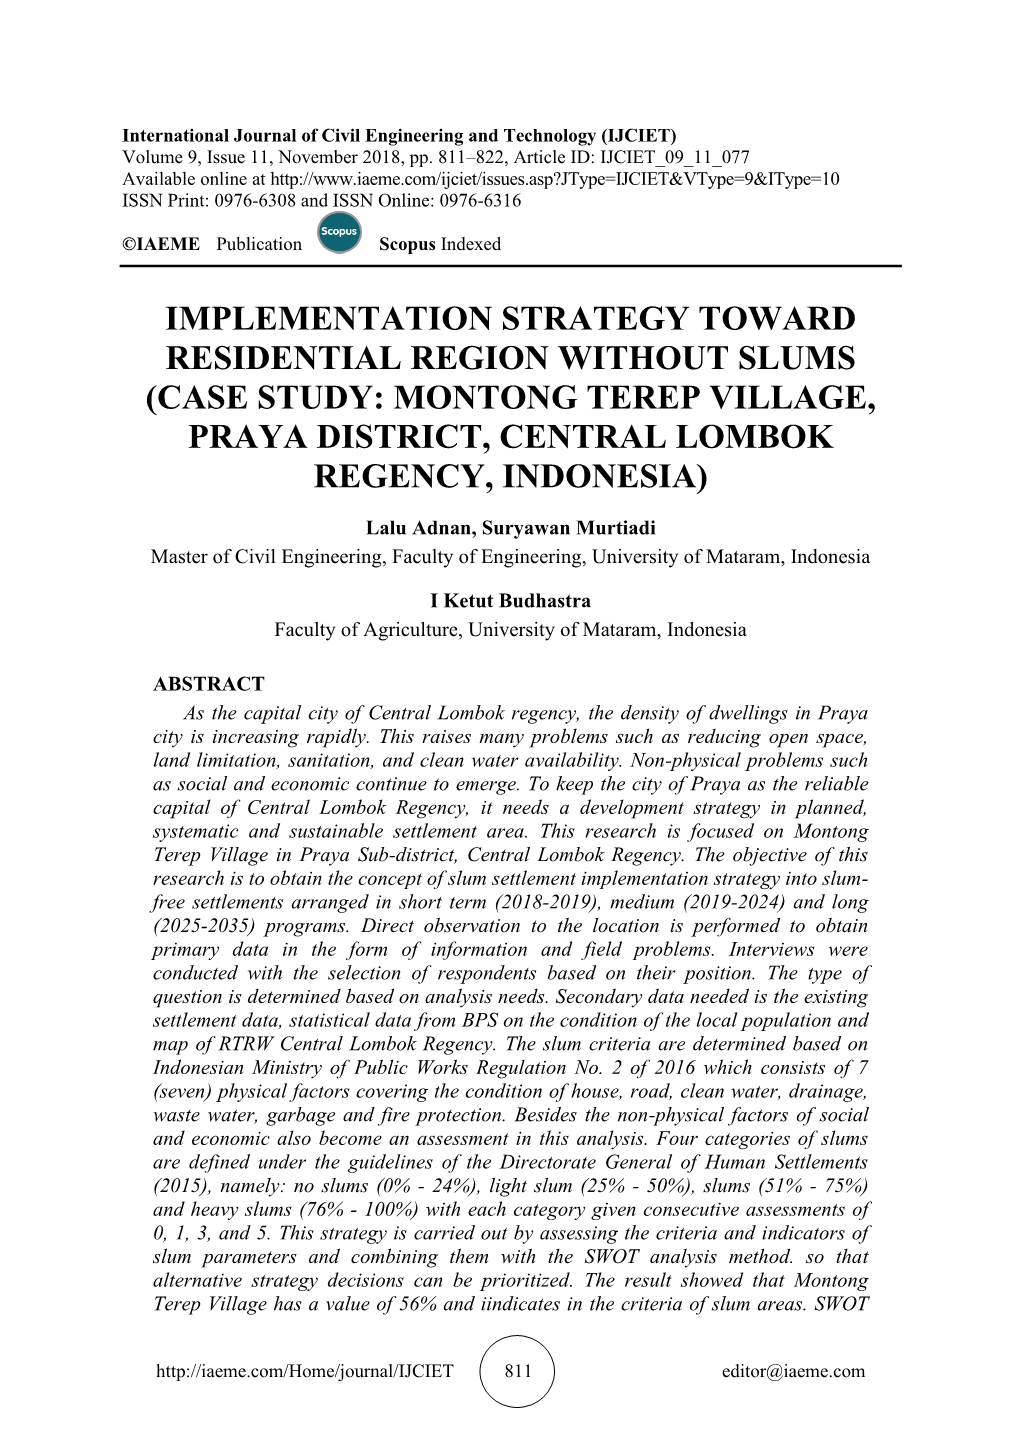 Implementation Strategy Toward Residential Region Without Slums (Case Study: Montong Terep Village, Praya District, Central Lombok Regency, Indonesia)